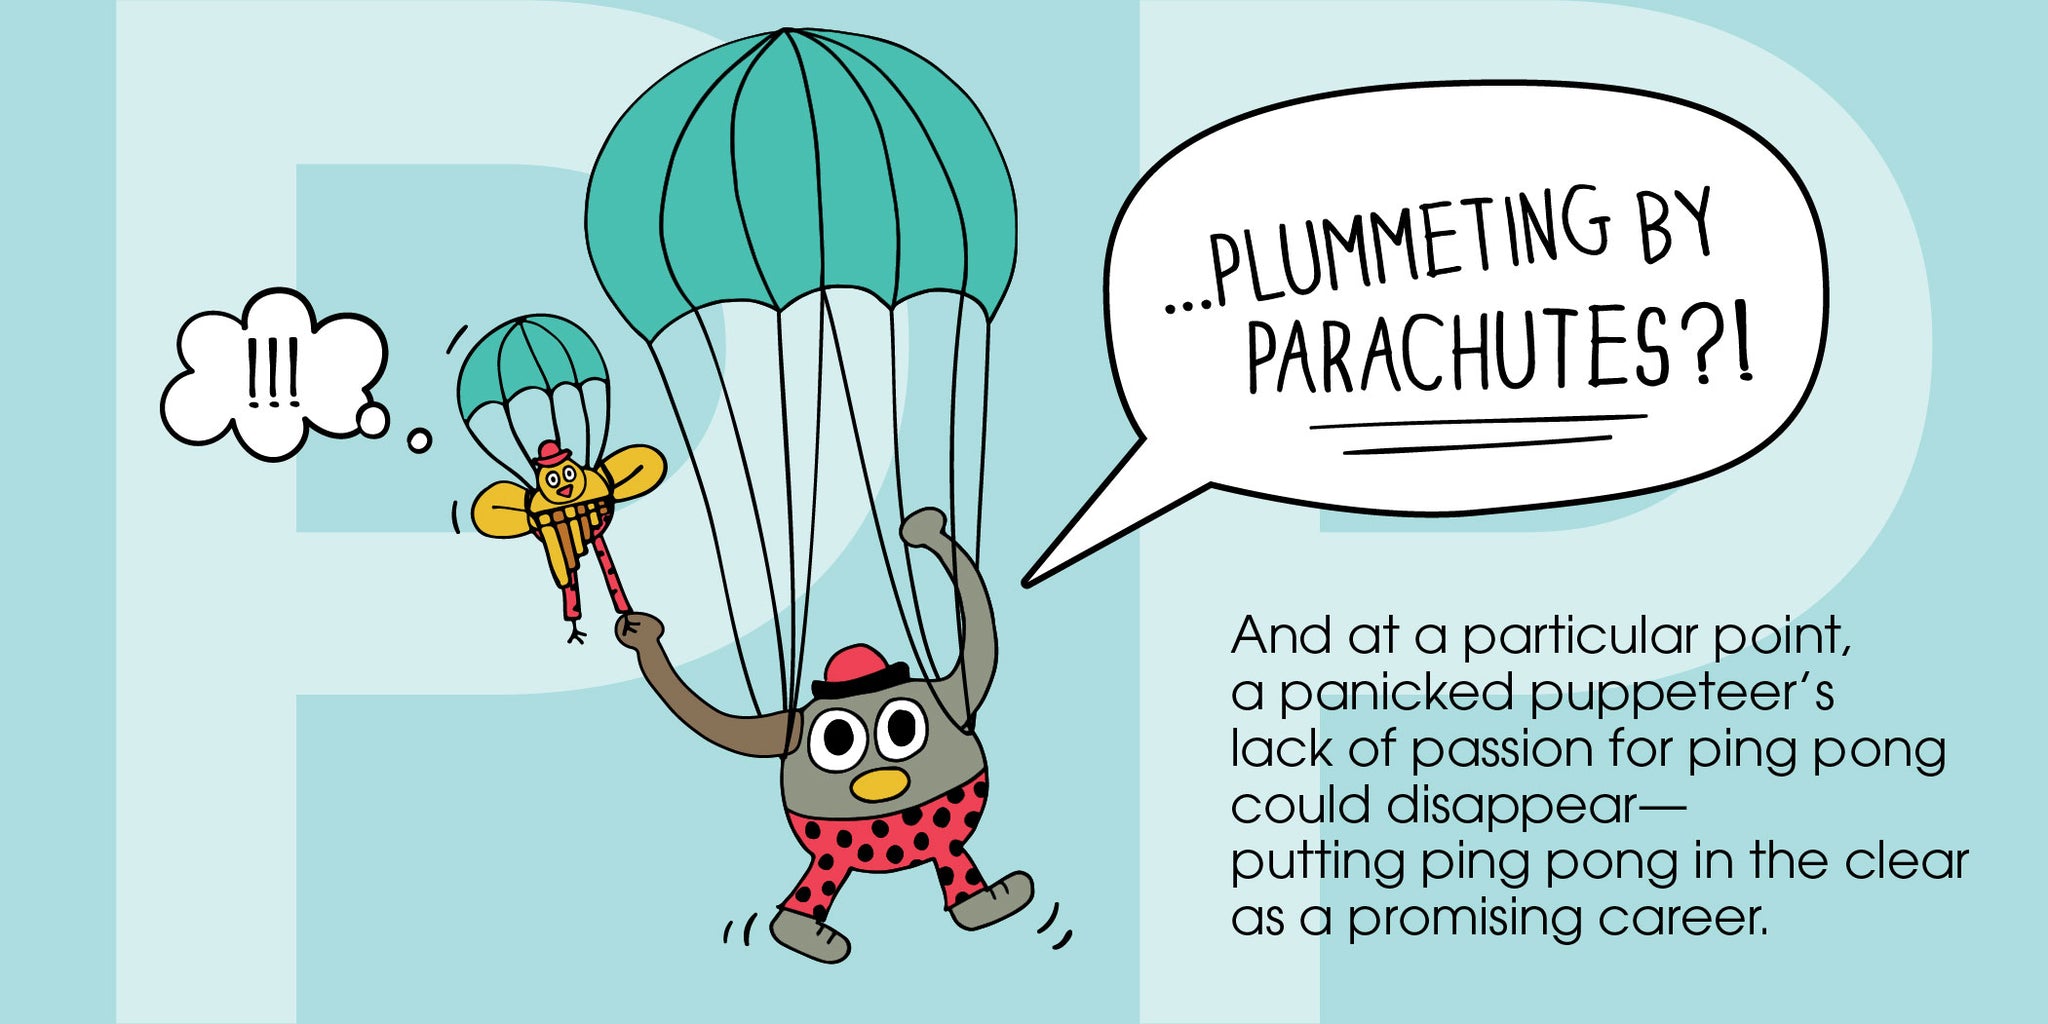 "...plummeting by parachutes?!" And at some point, a panicked puppeteer's lack of passion could disappear–putting ping pong in the clear as a promising career.